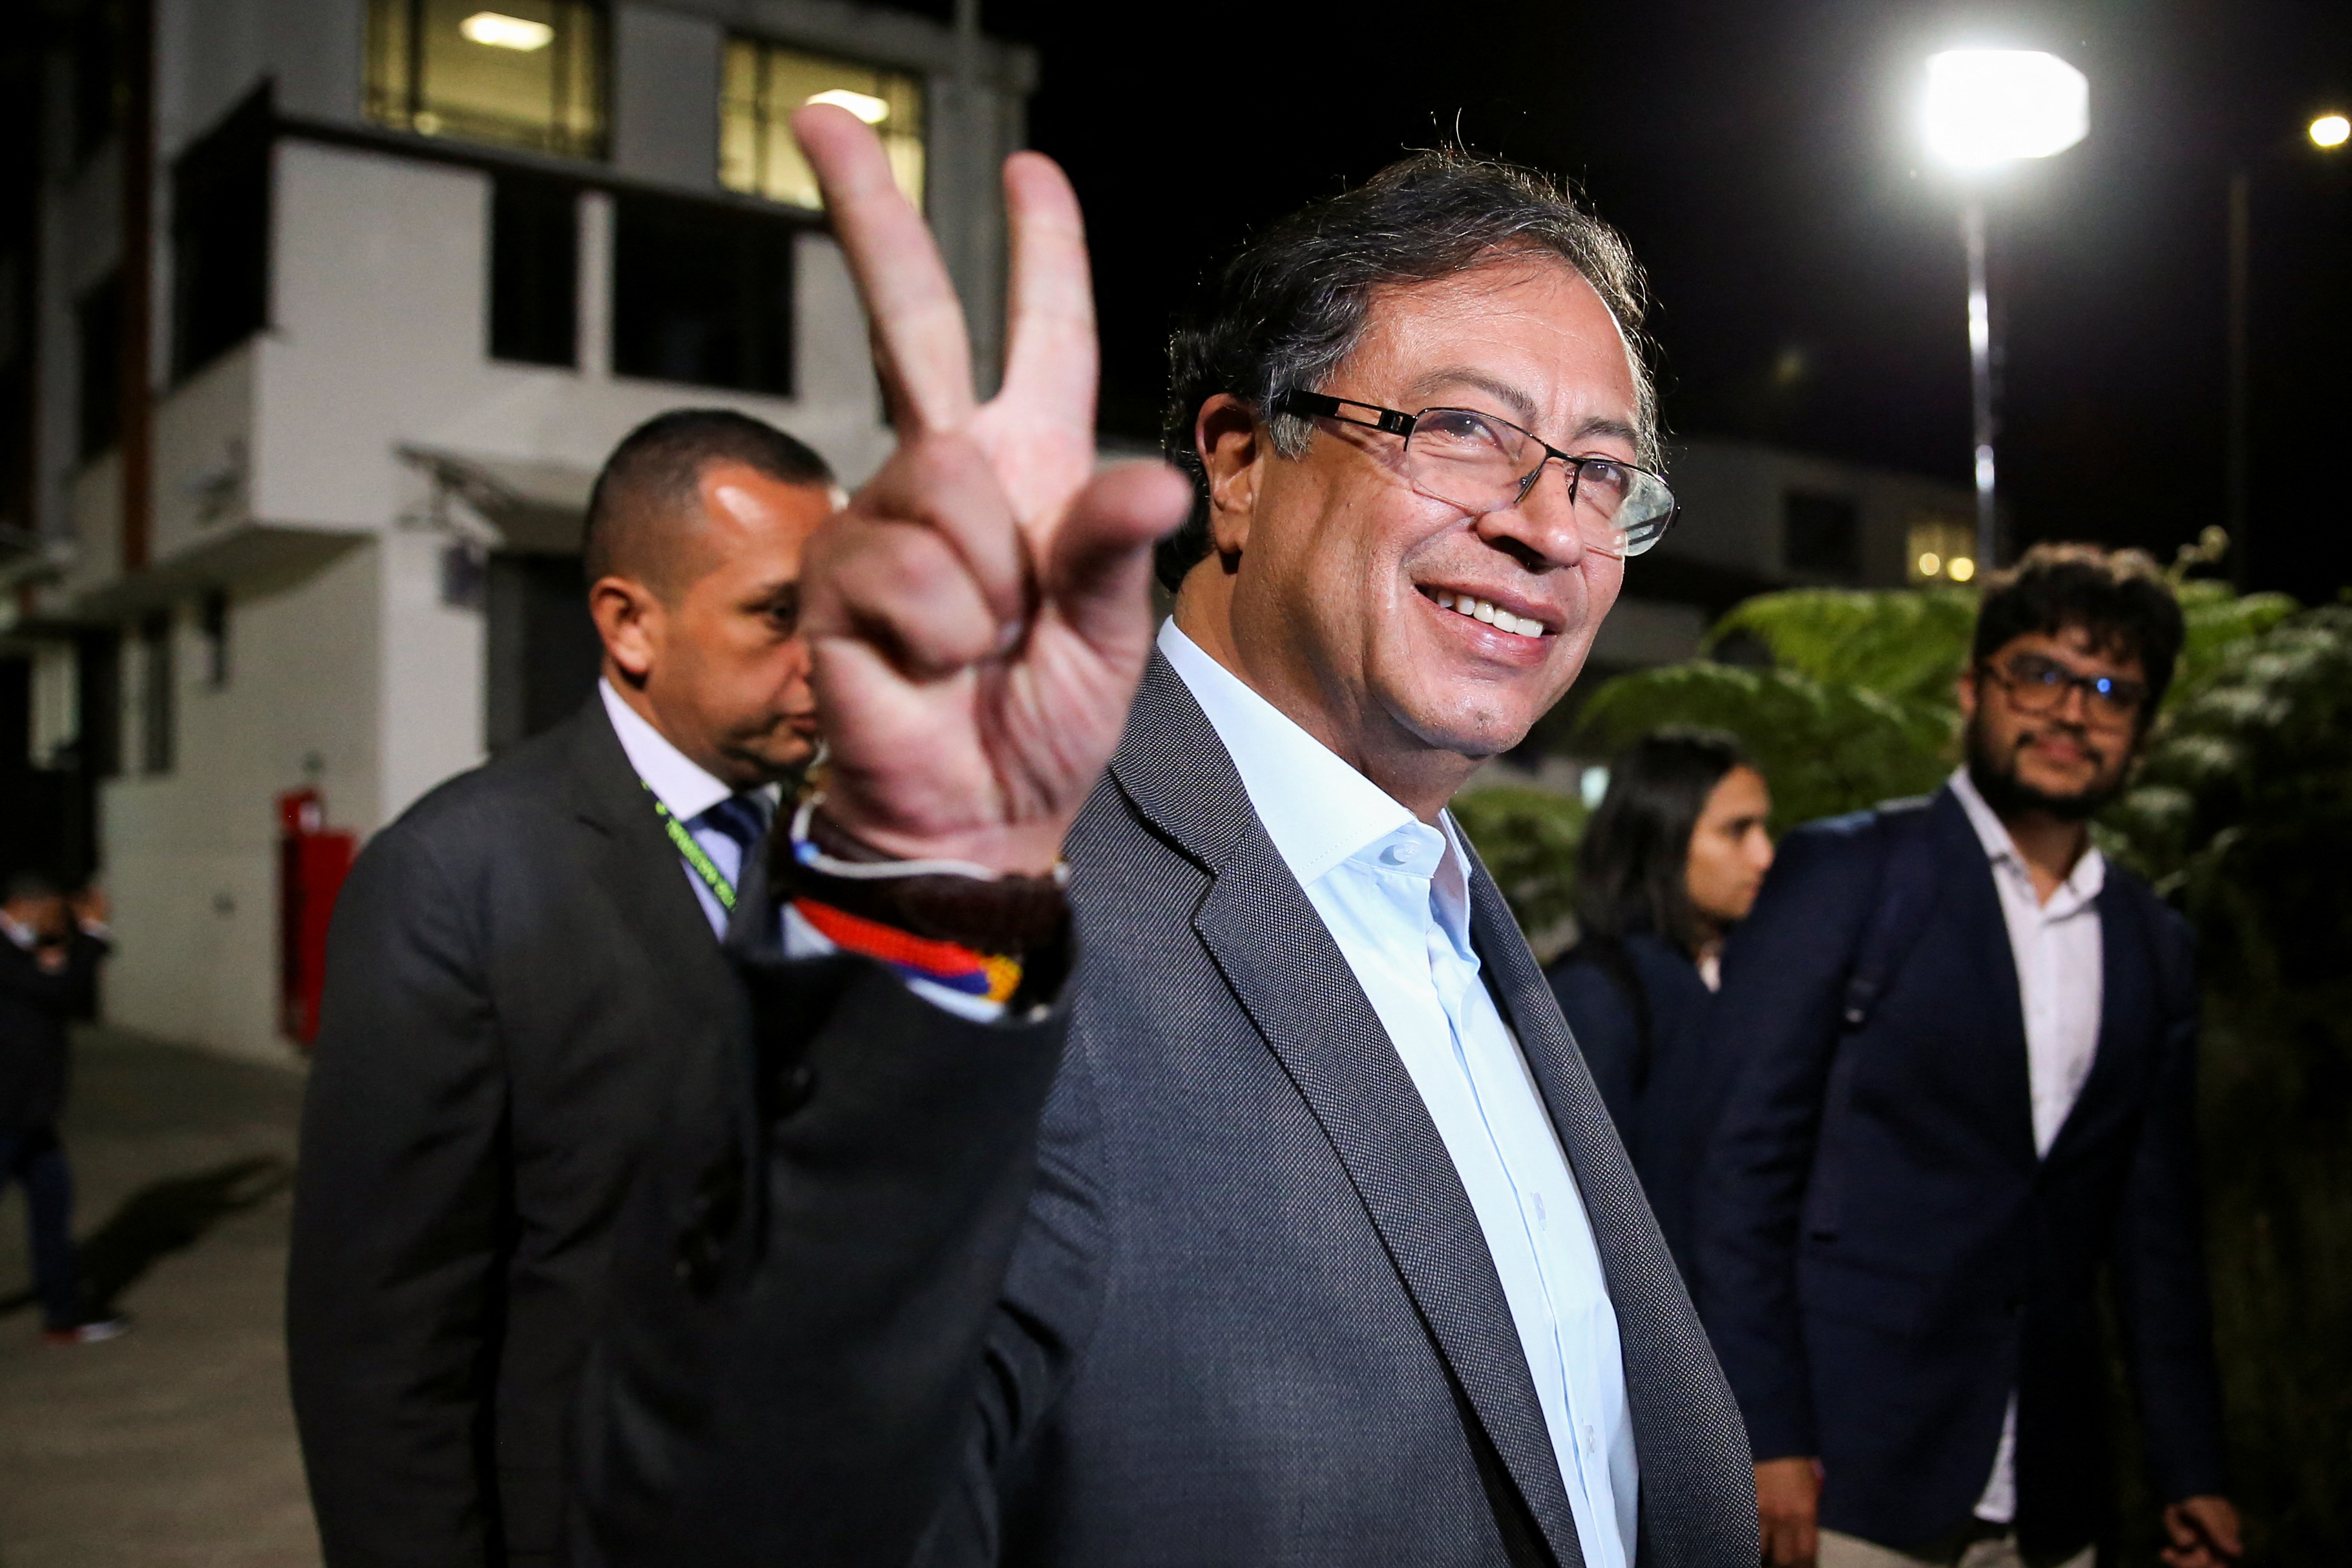 Colombian left-wing presidential candidate Gustavo Petro of the Historic Pact coalition reacts during his arrival for a televised debate at the Caracol channel, in Bogota, Colombia May 27, 2022. REUTERS/Luisa Gonzalez